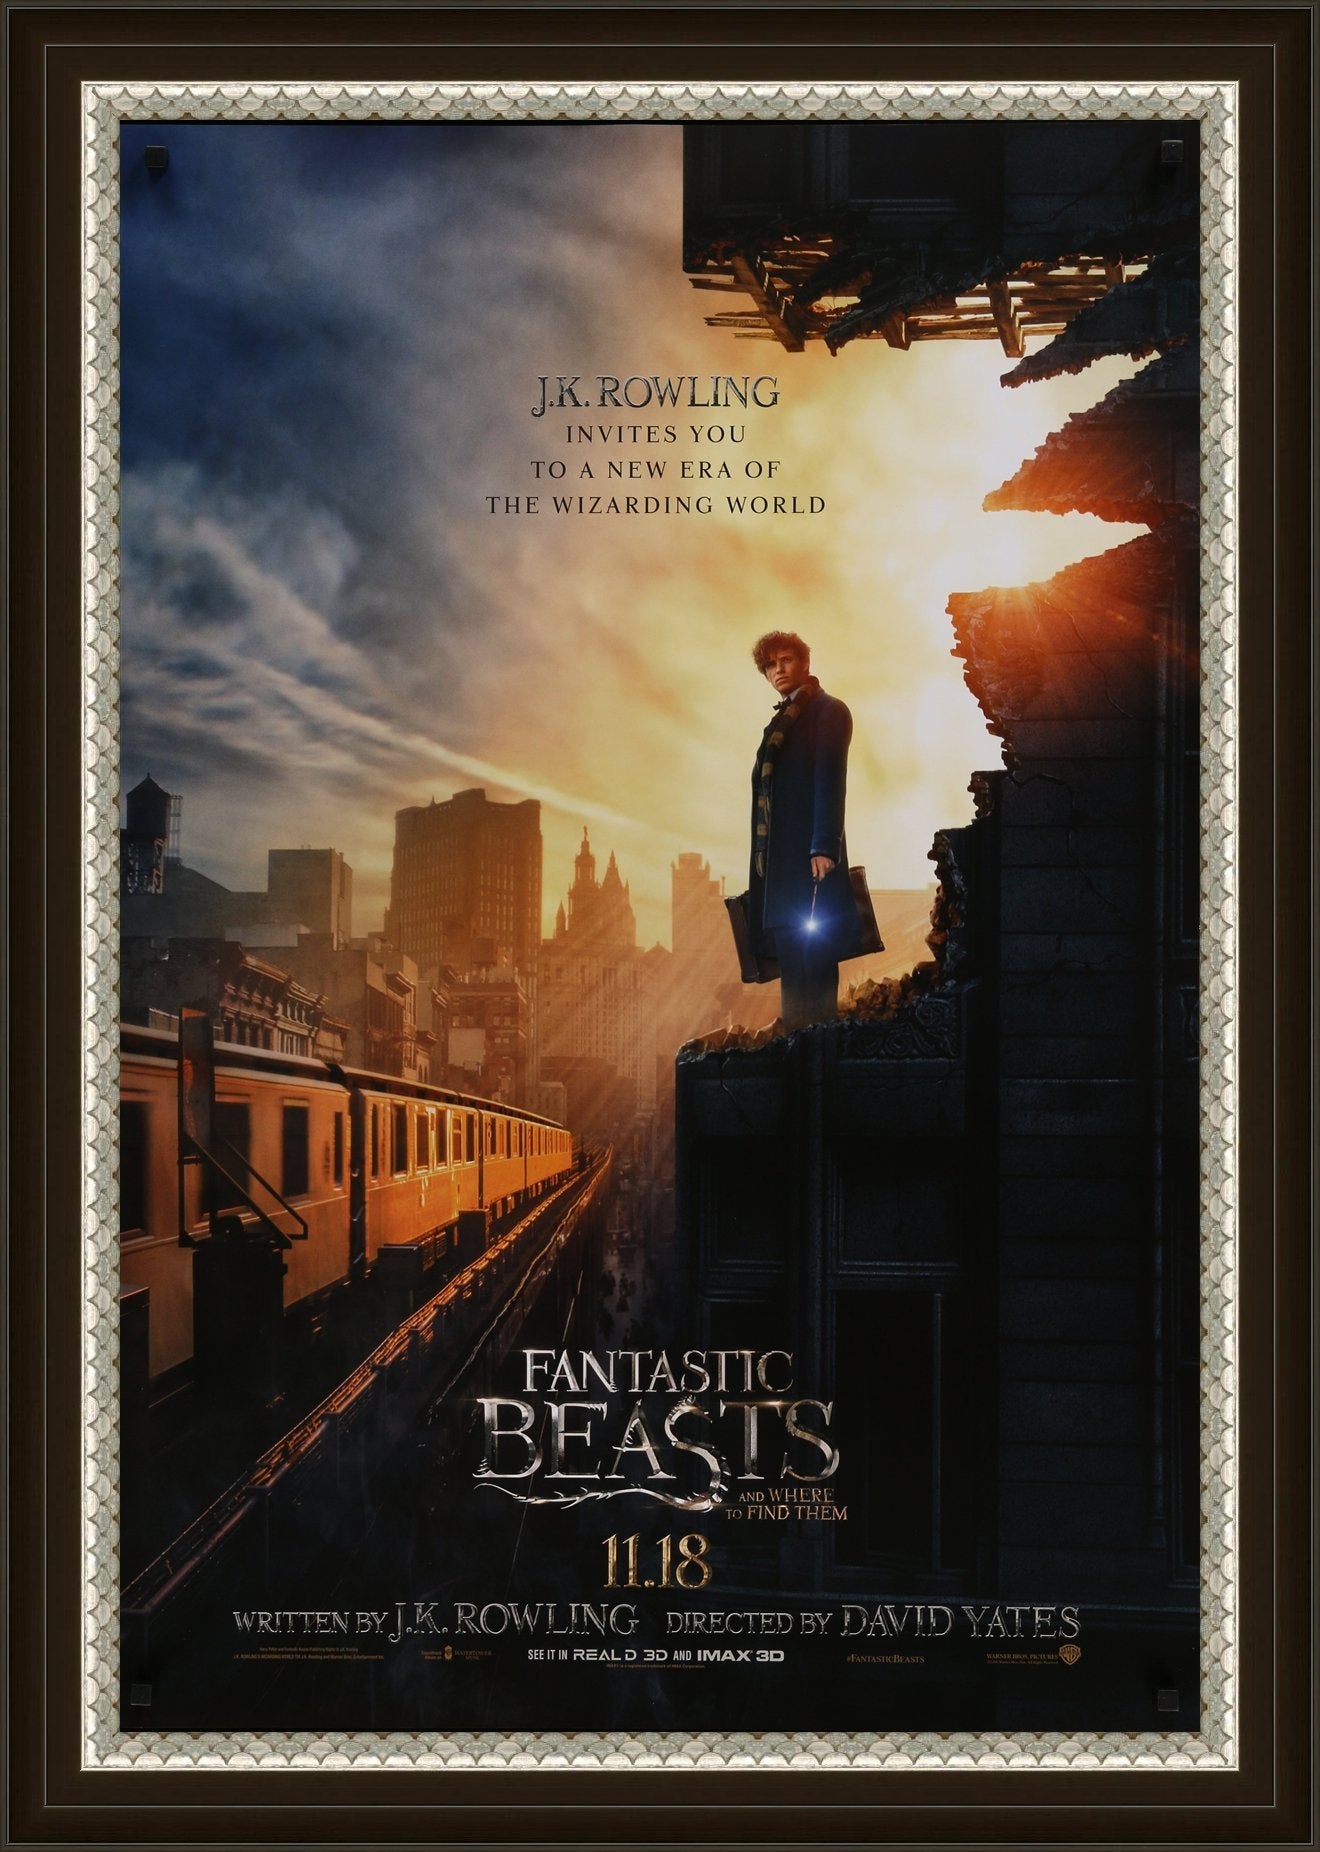 Fantastic Beasts and Where to Find Them - 2016 - Harry Potter - Art of the Movies